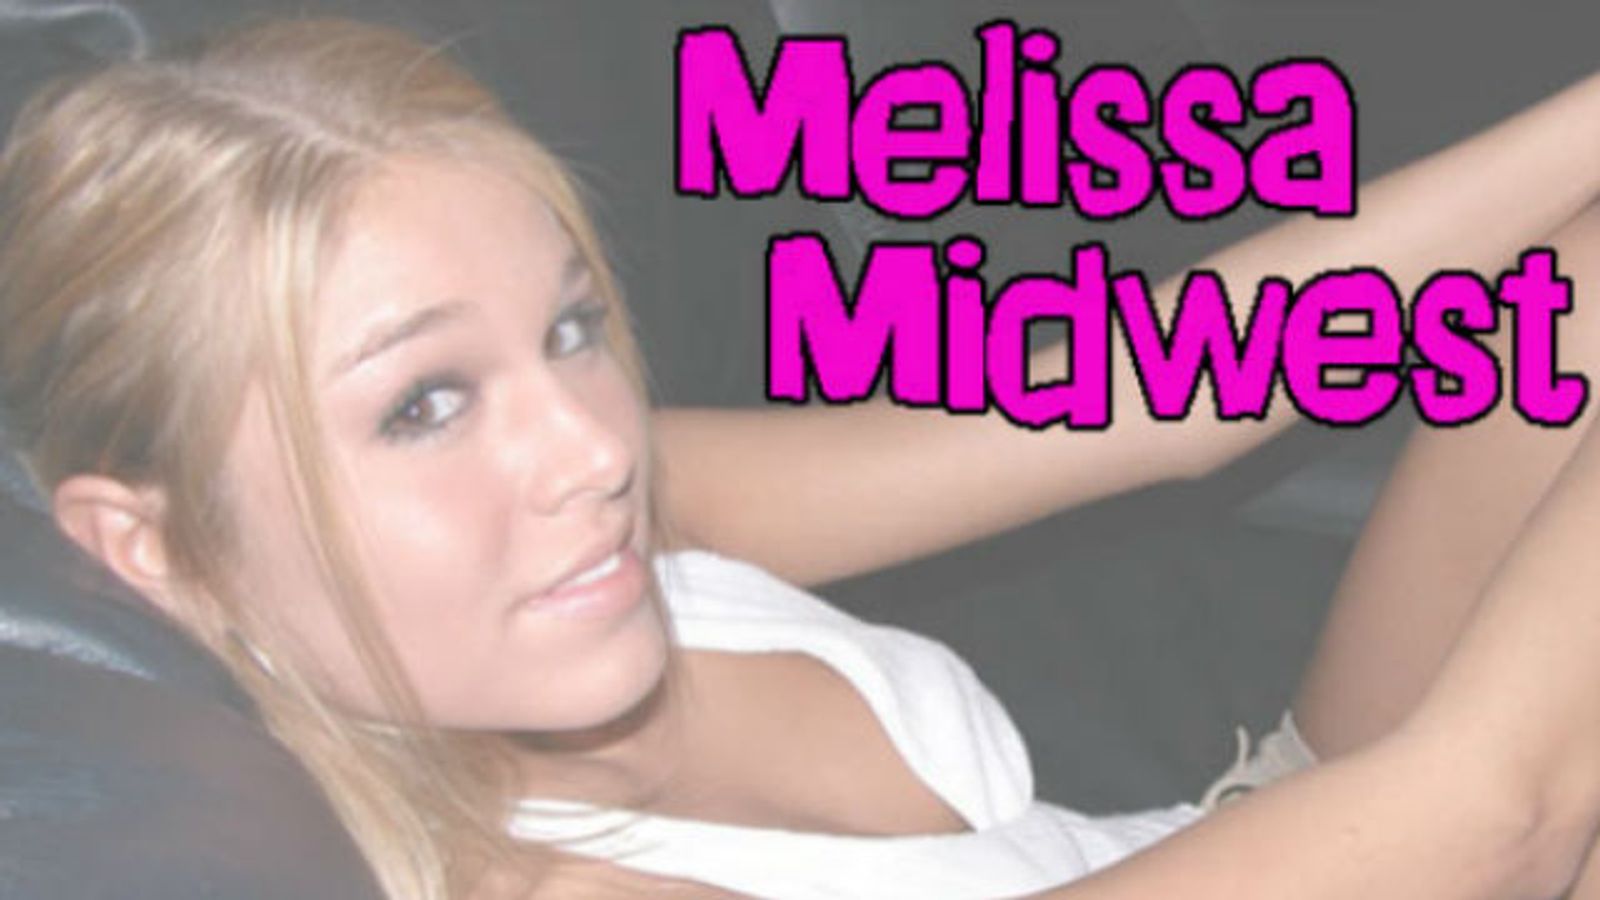 Melissa Midwest Withdraws from Match.com Lawsuit